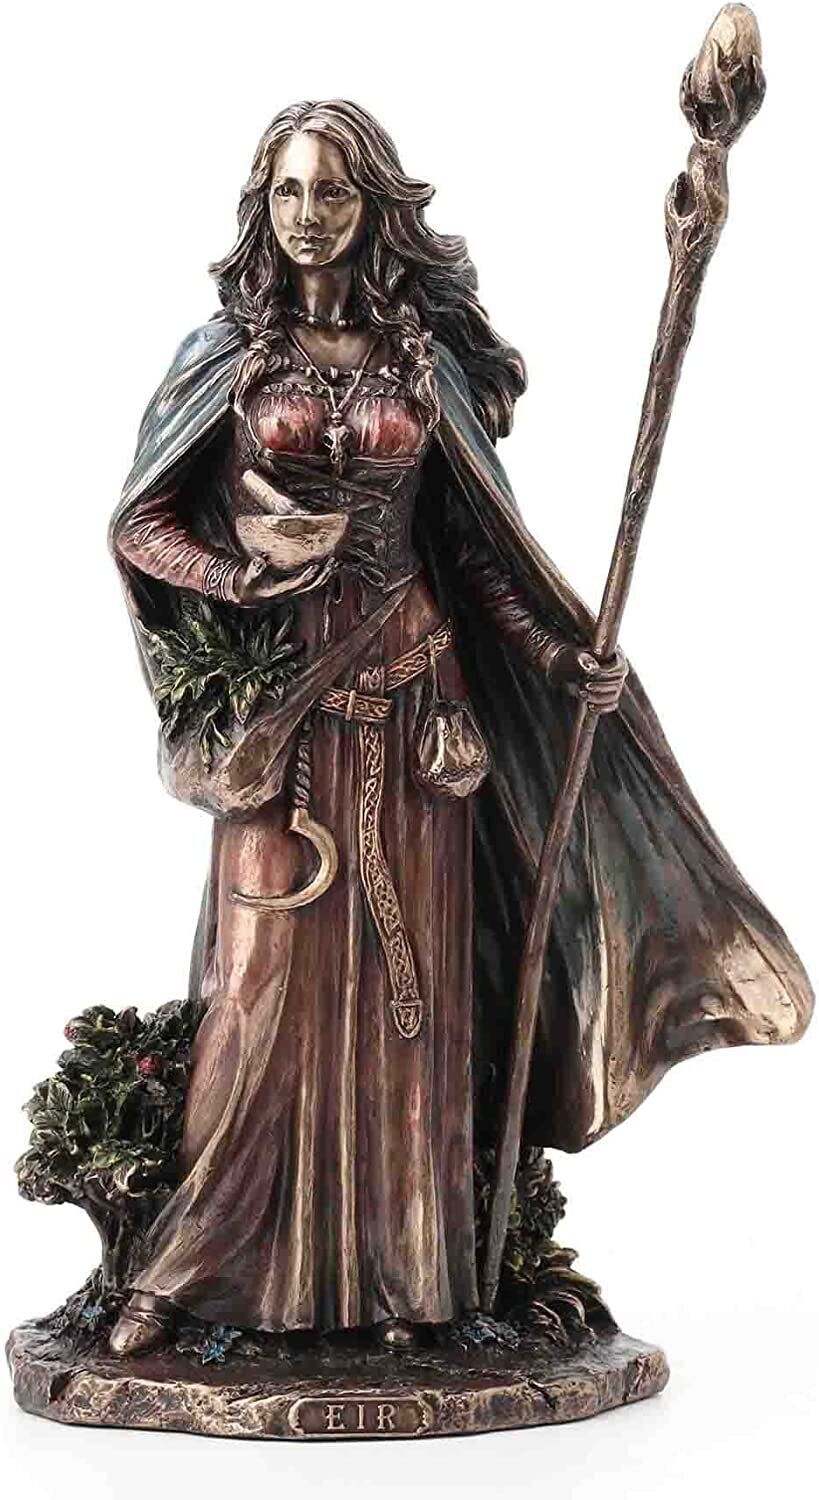 Veronese Design Norse Eir The Valkyrie of Protection Resin Statue Bronze Finish 